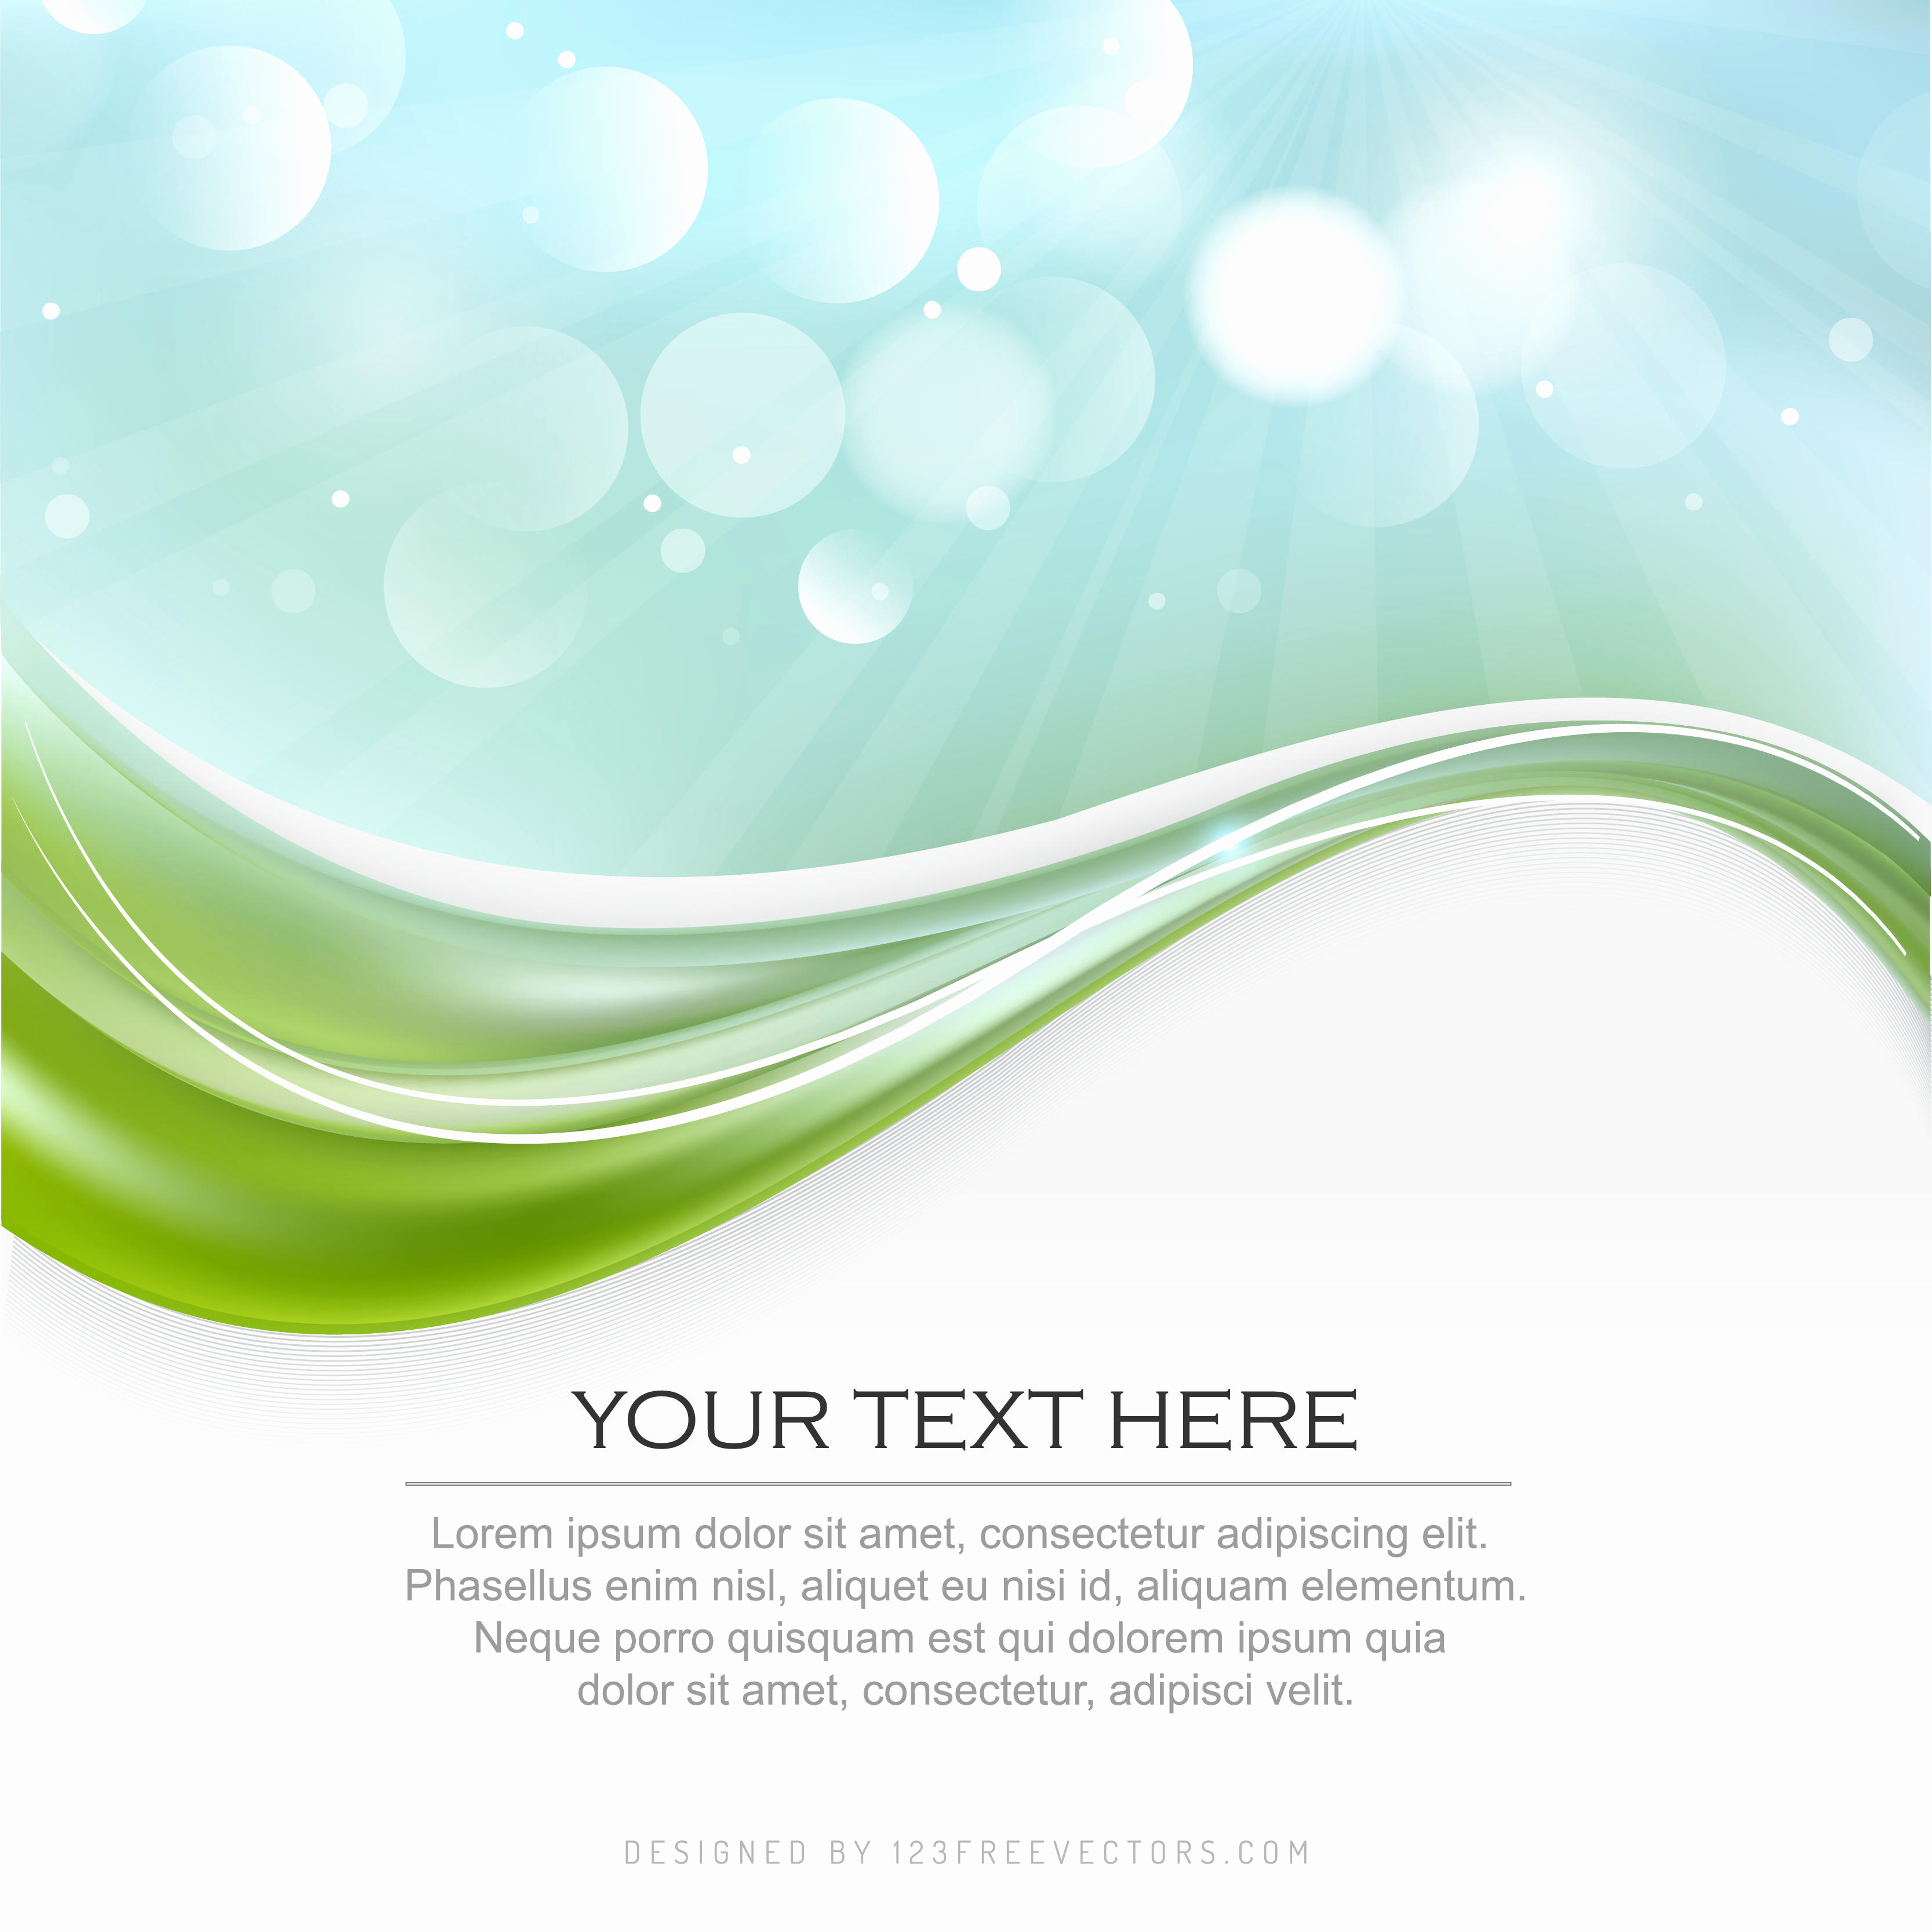 Free Graphic Design Templates New Abstract Blue Green Background Graphic Design Template